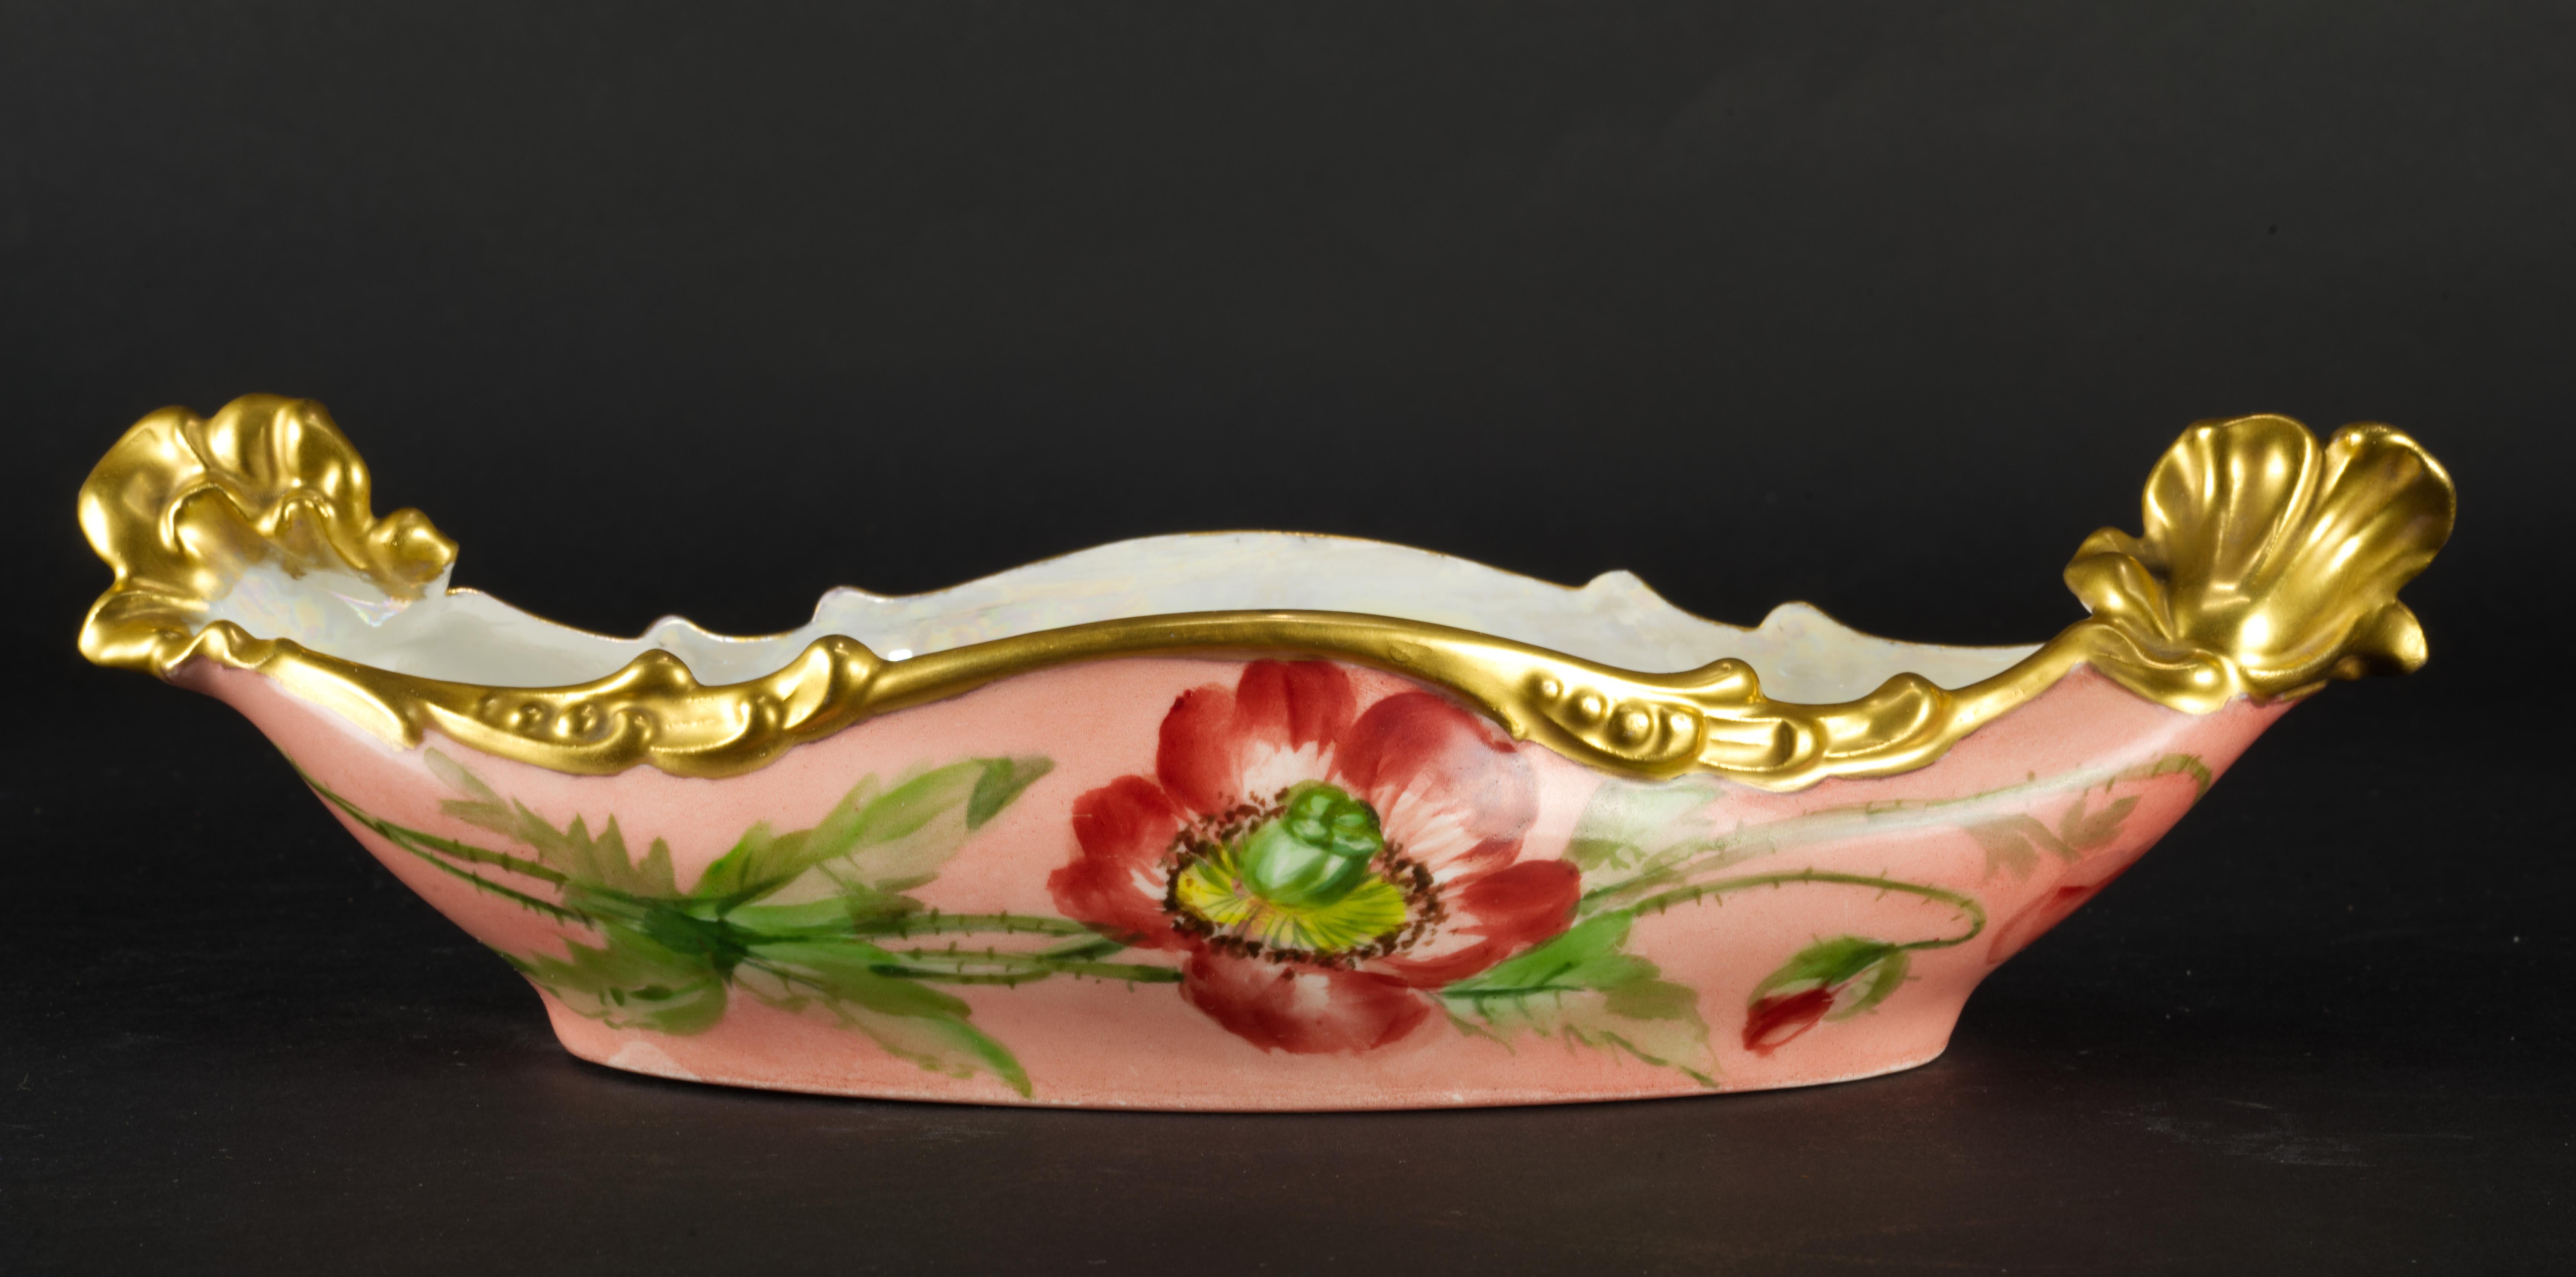 Rare Jean Pouyat Limoges France Oval Hand-painted Porcelain Ravier Bowl, 1926 For Sale 3